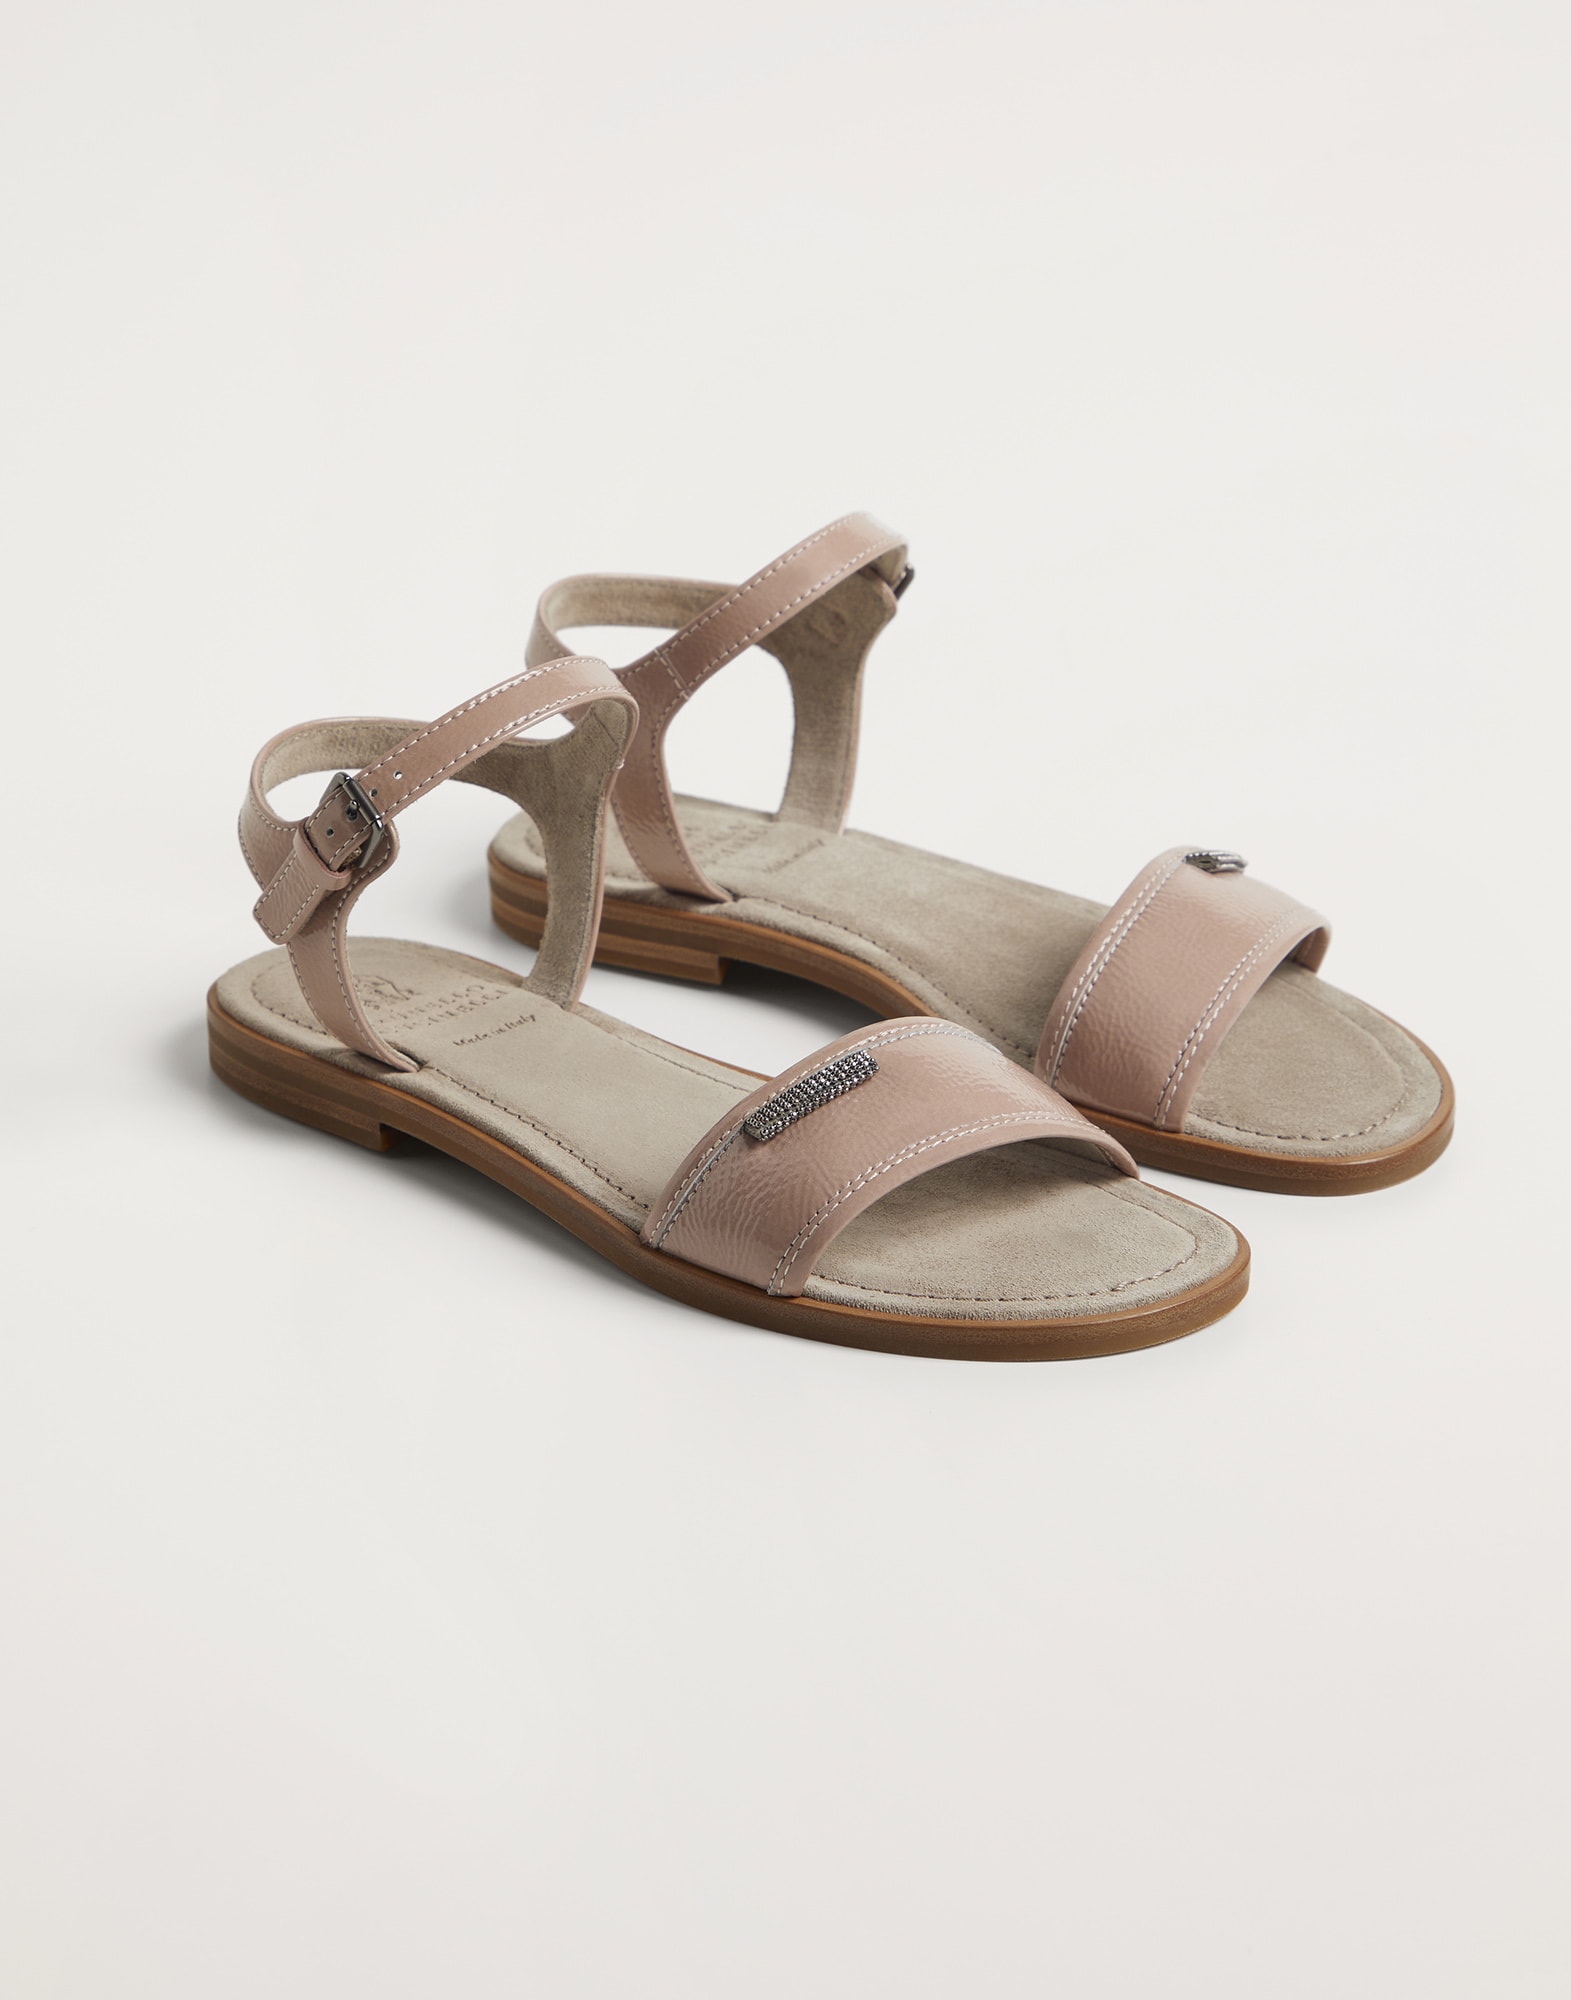 Sandals - Front view